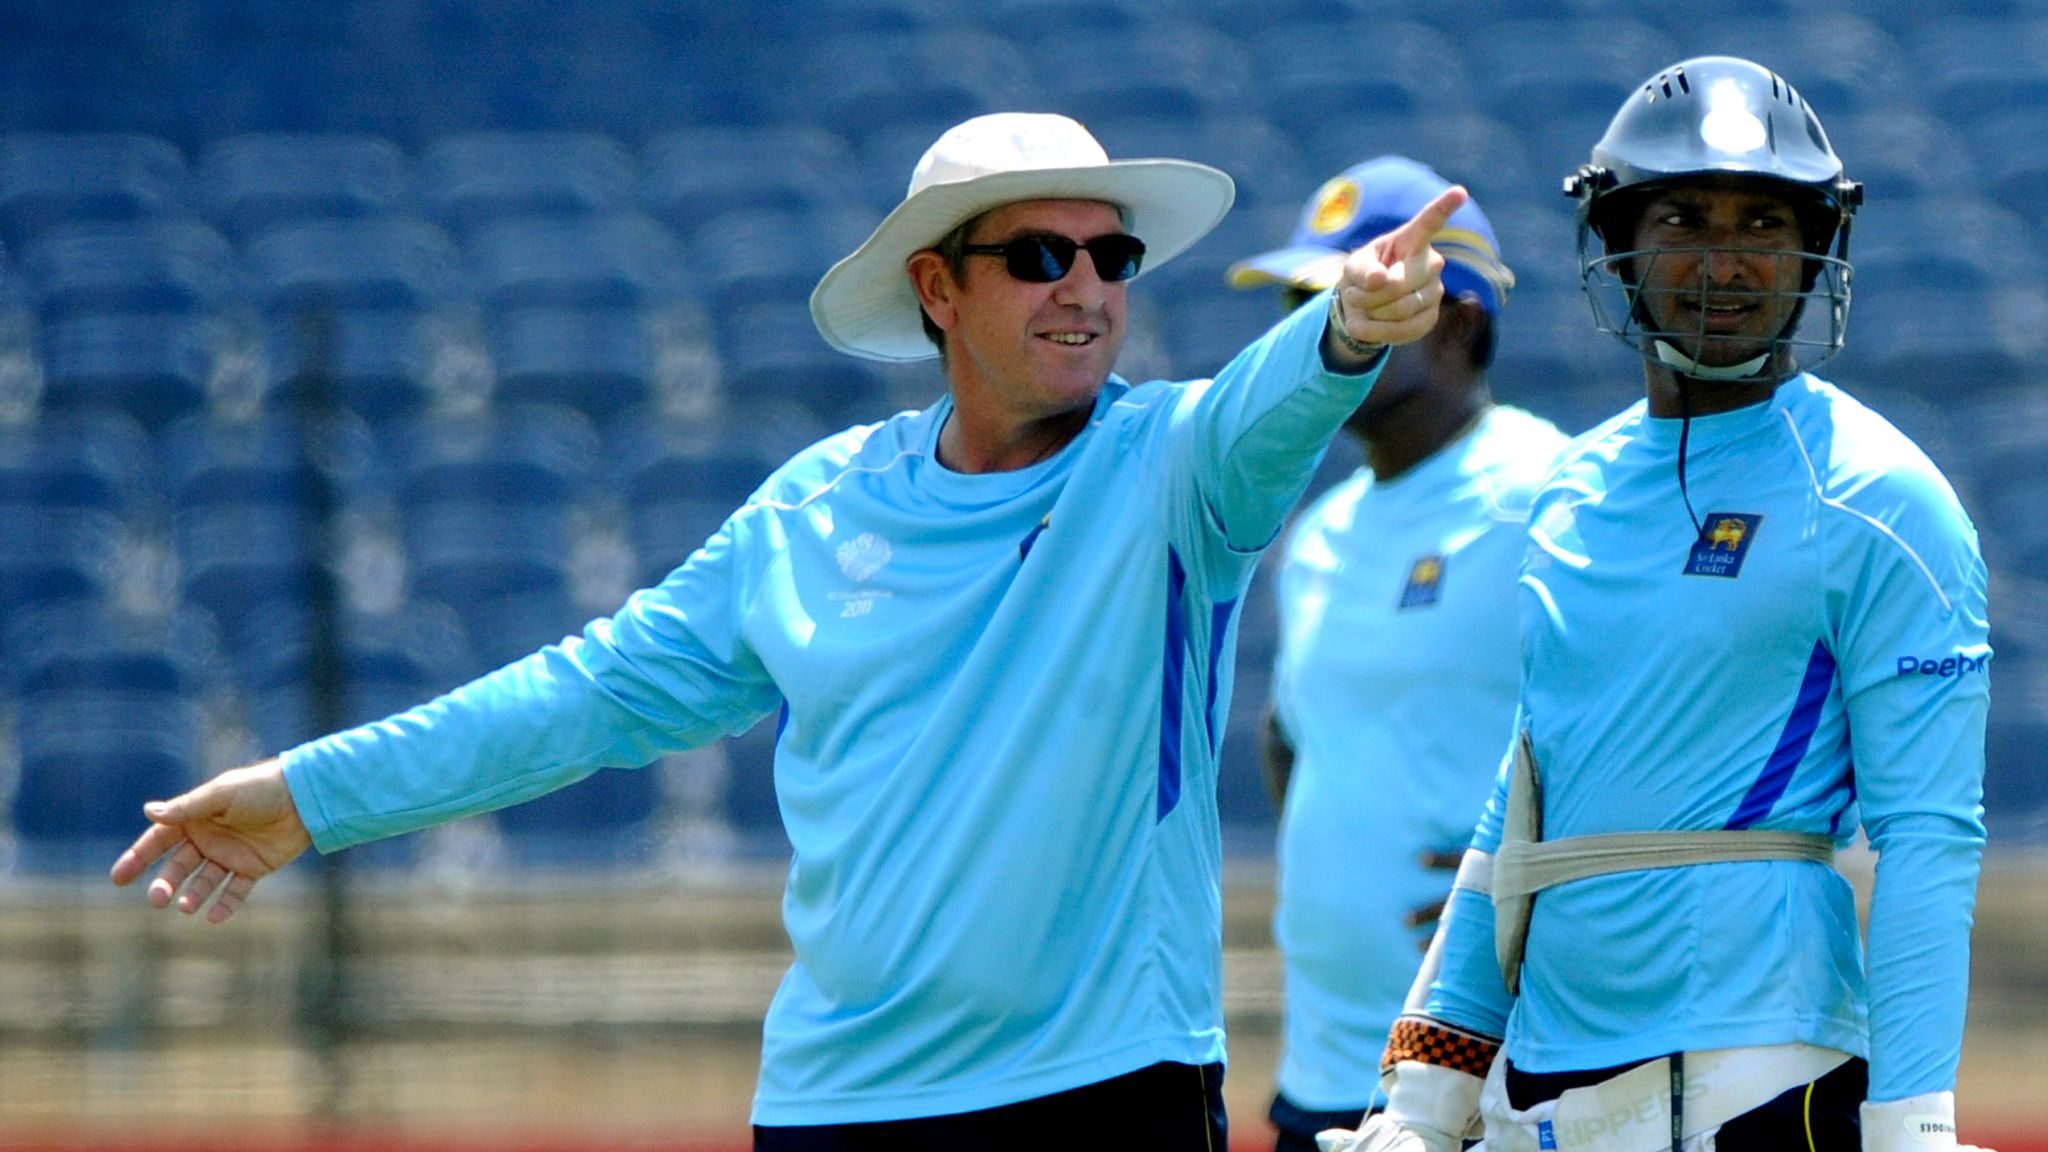 Who Should Succeed Trevor Bayliss As Coach Of The England Cricket Team?